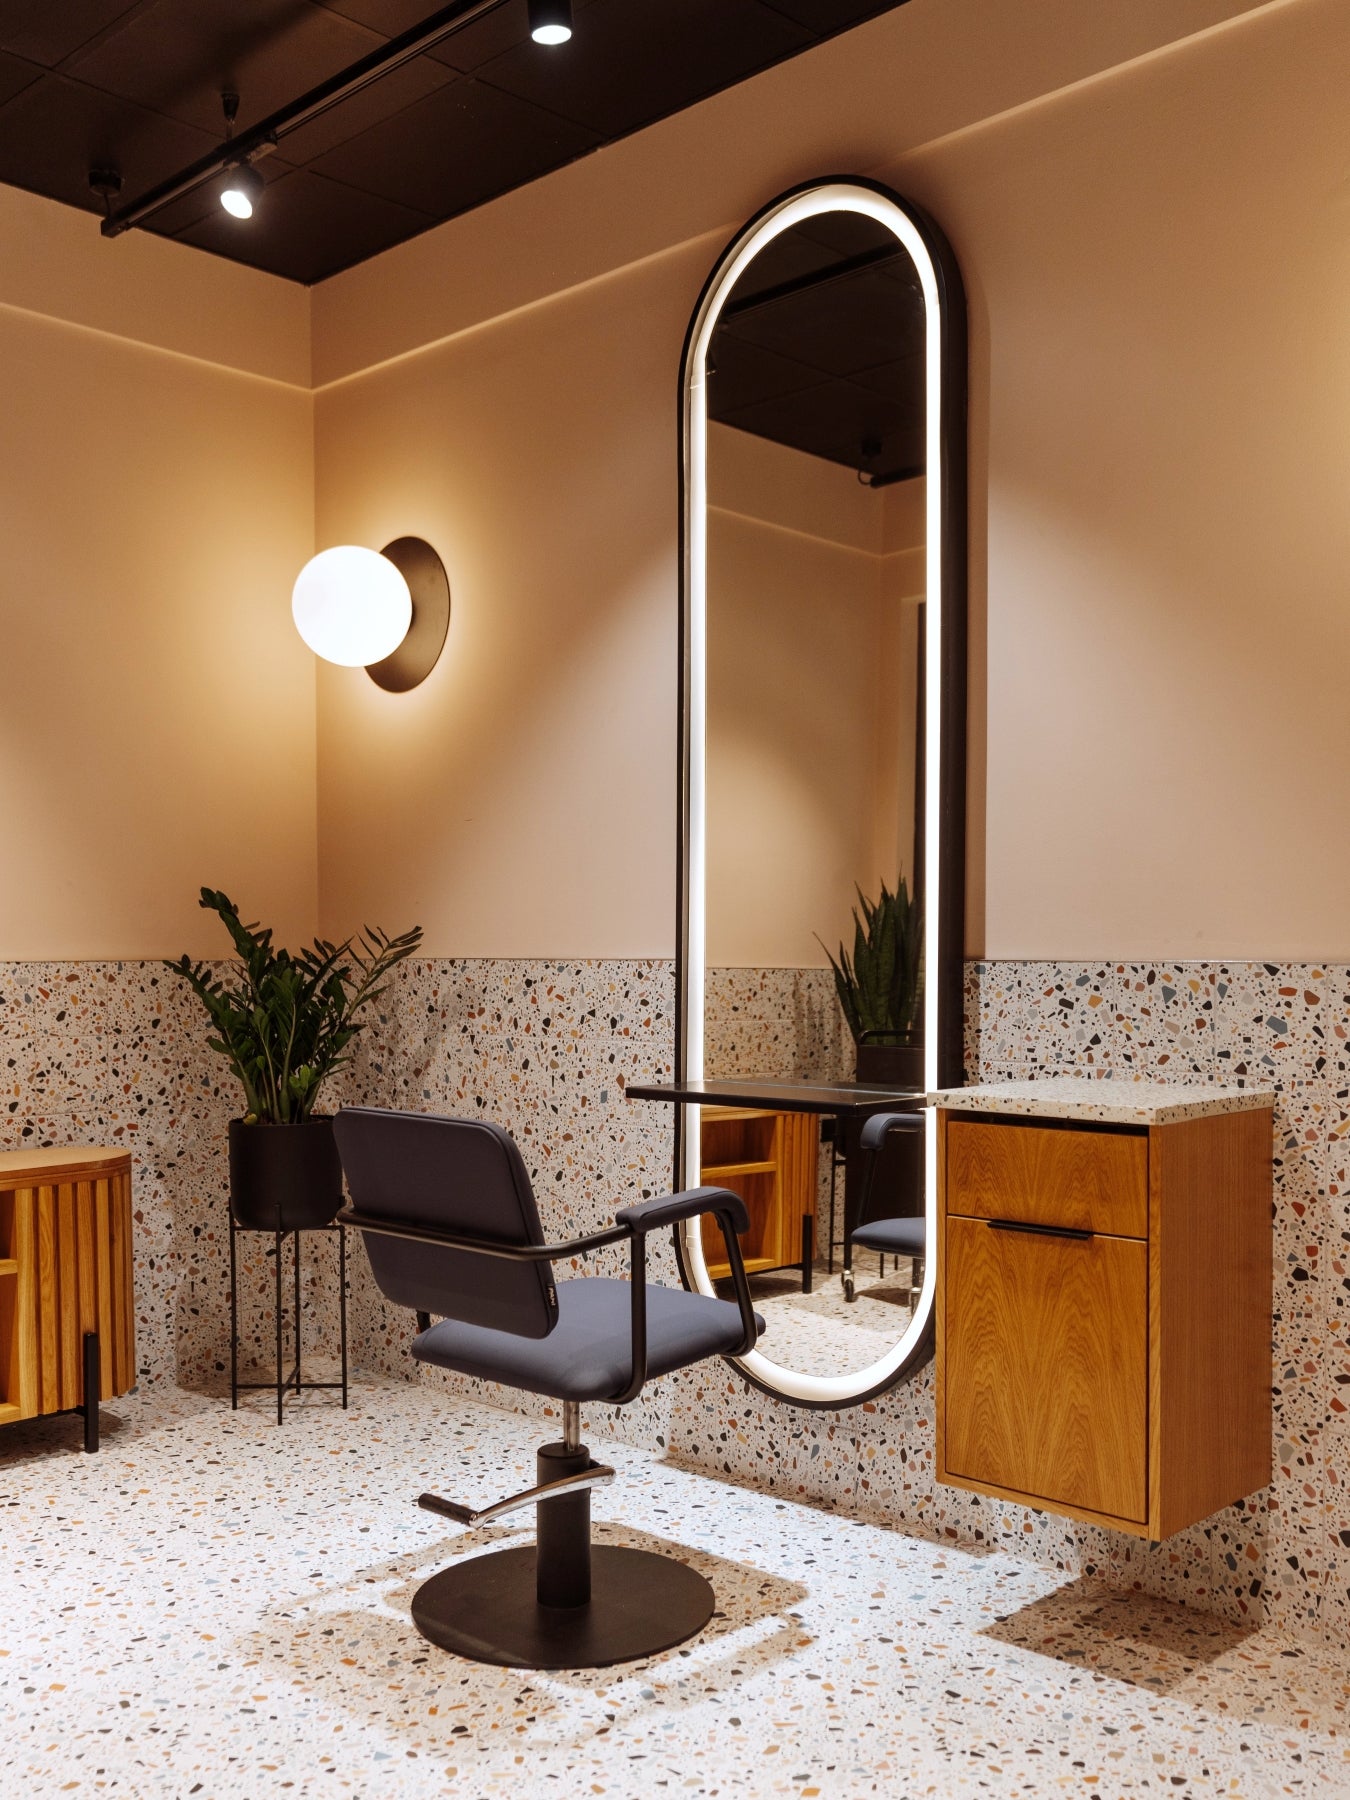 Collinge & Co Castle Street private room hairdressing mirror